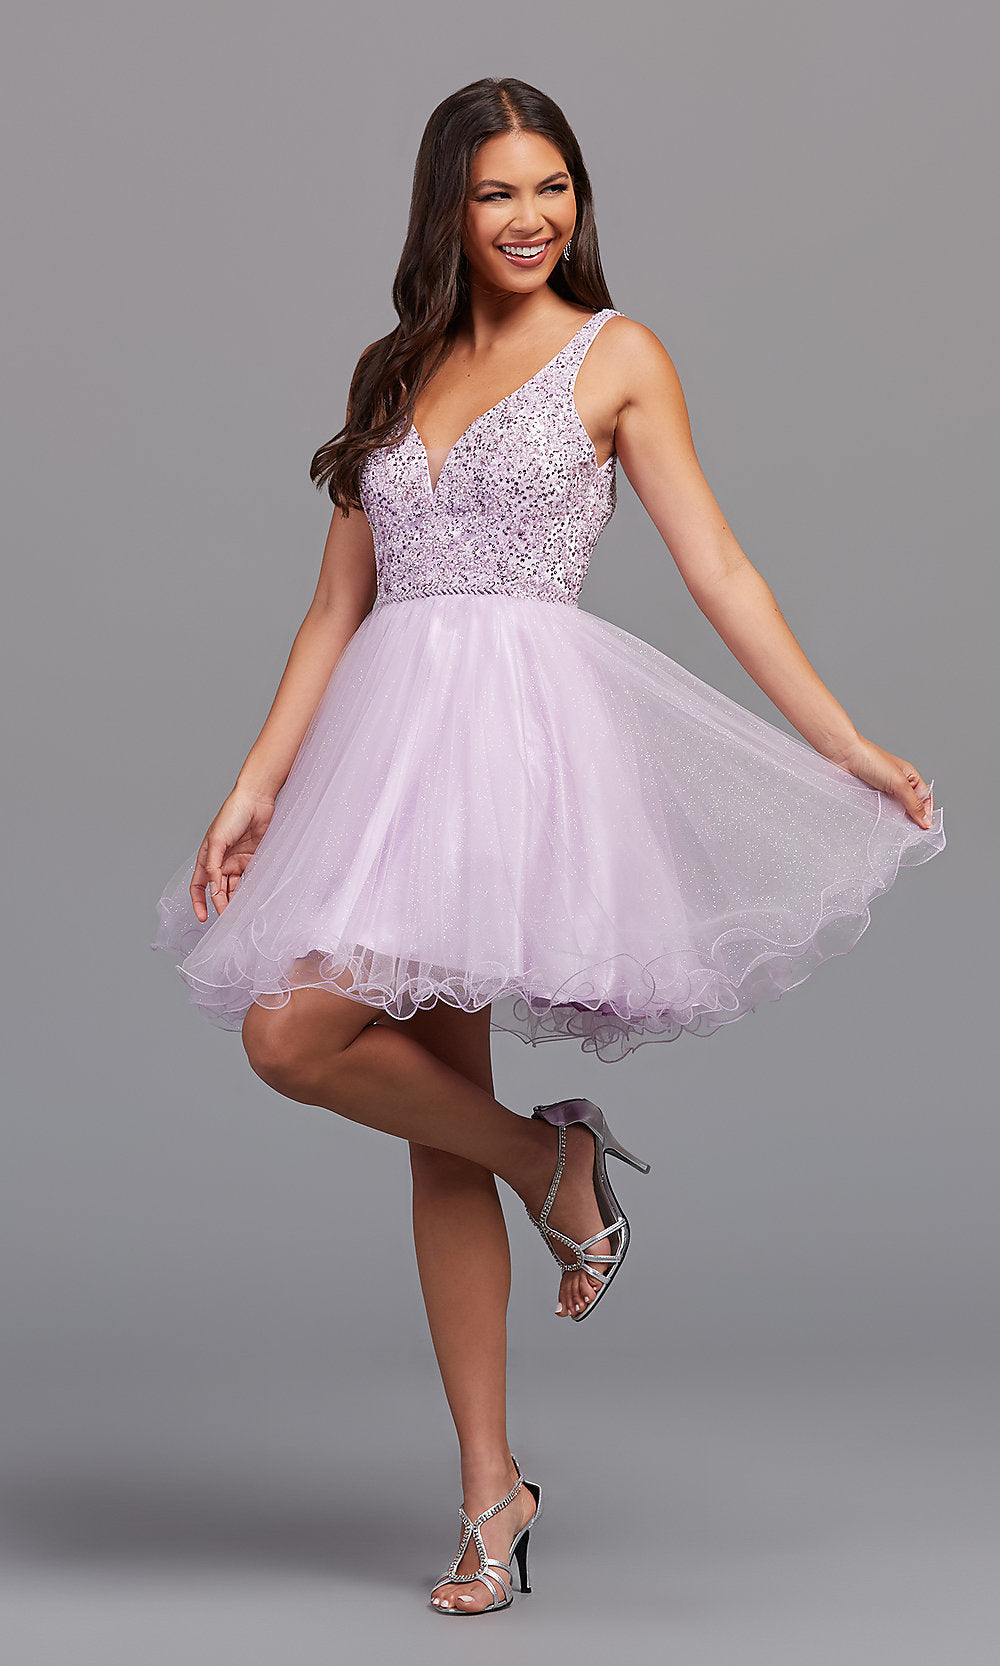  Beaded Fit-and-Flare Short Formal Homecoming Dress